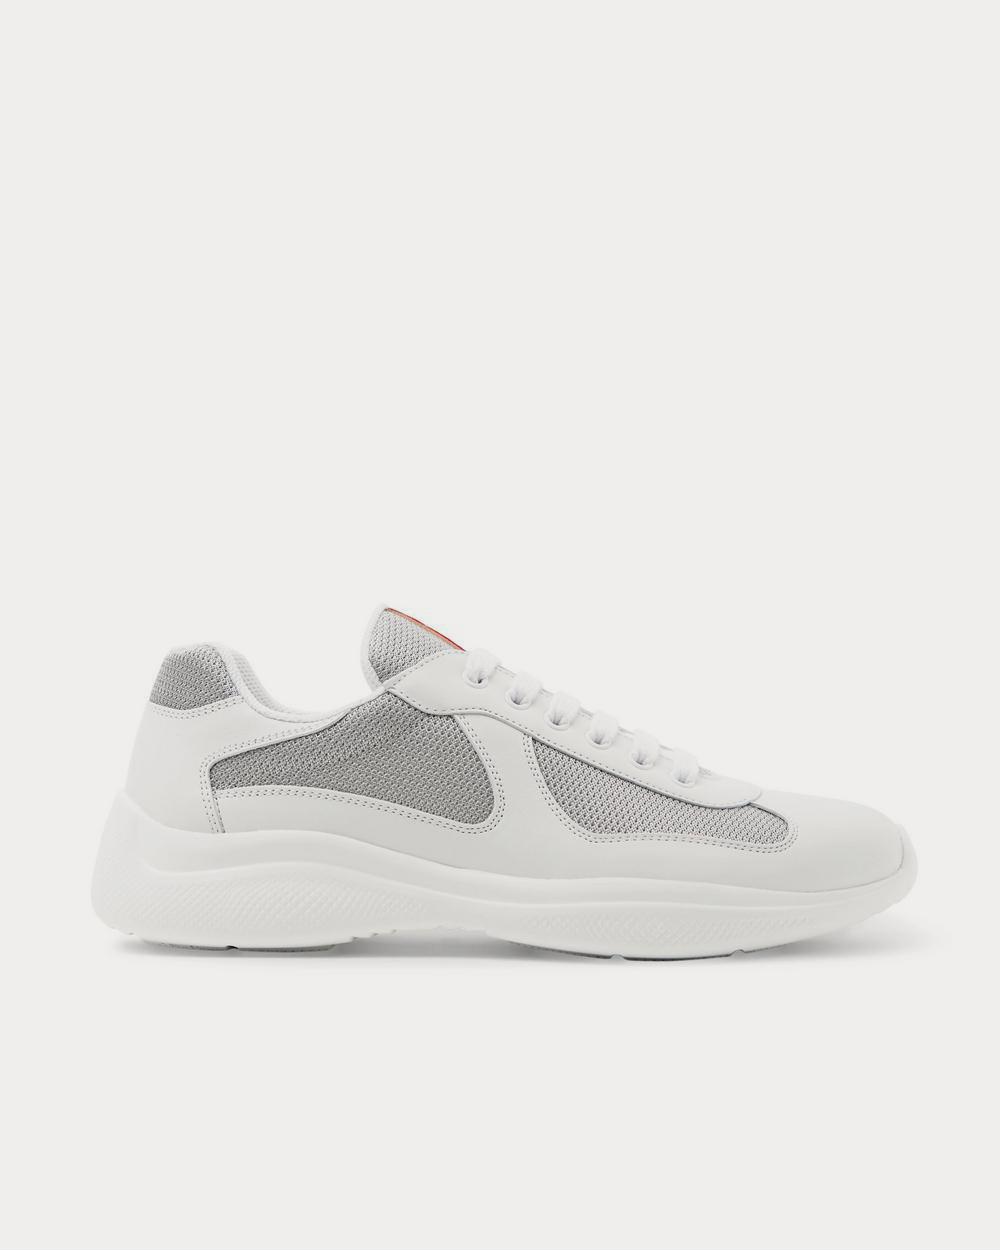 Prada - America's Cup Leather and Mesh  White low top sneakers